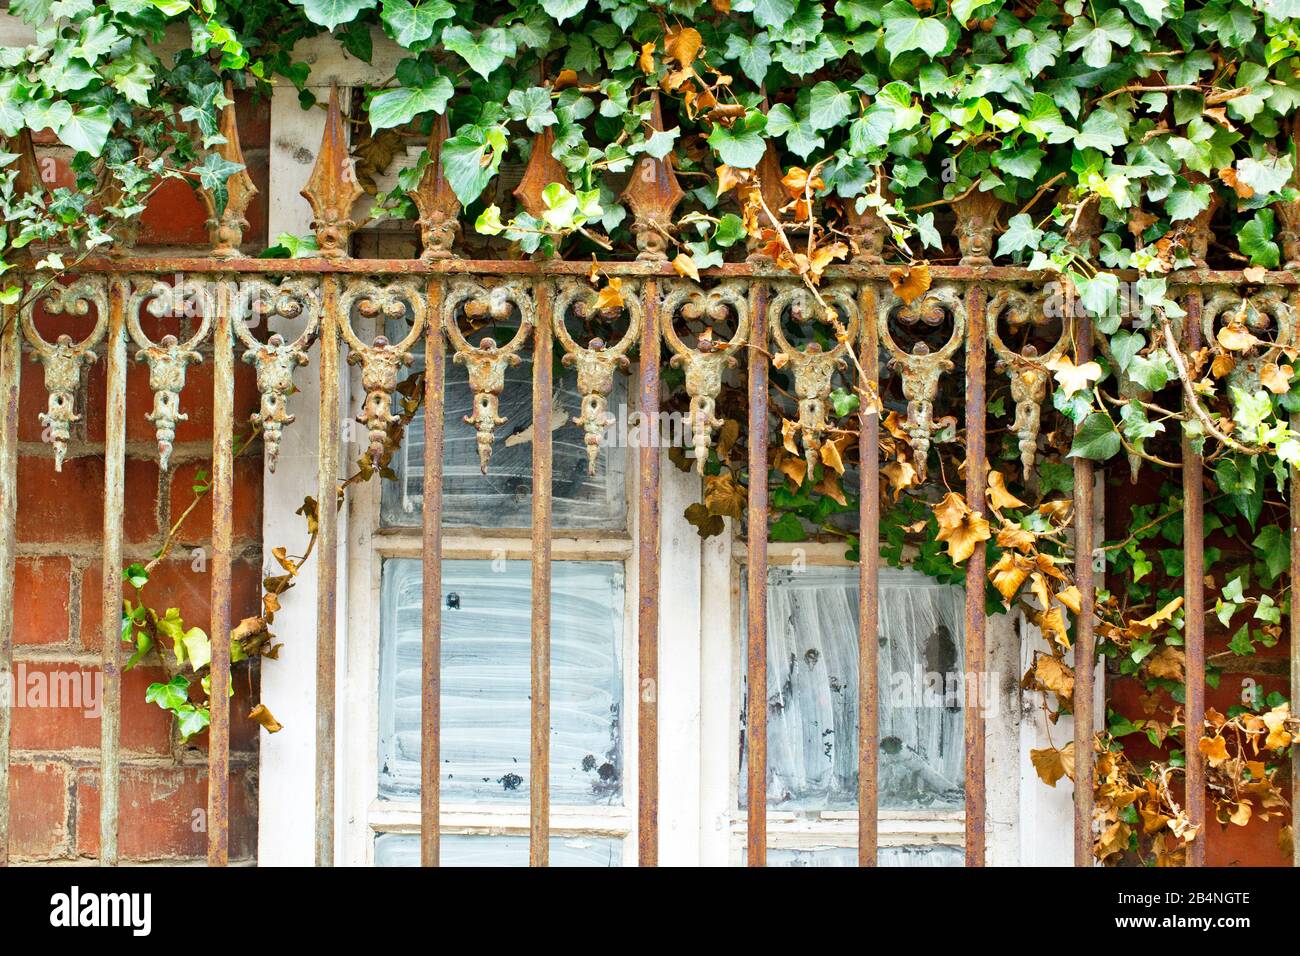 Rusty railing with ivy arrowheads overgrown in front of painted window panes. Tréguier is a French city in the Côtes-d'Armor department in Brittany. Tréguier is the historic capital of the Trégor. Stock Photo